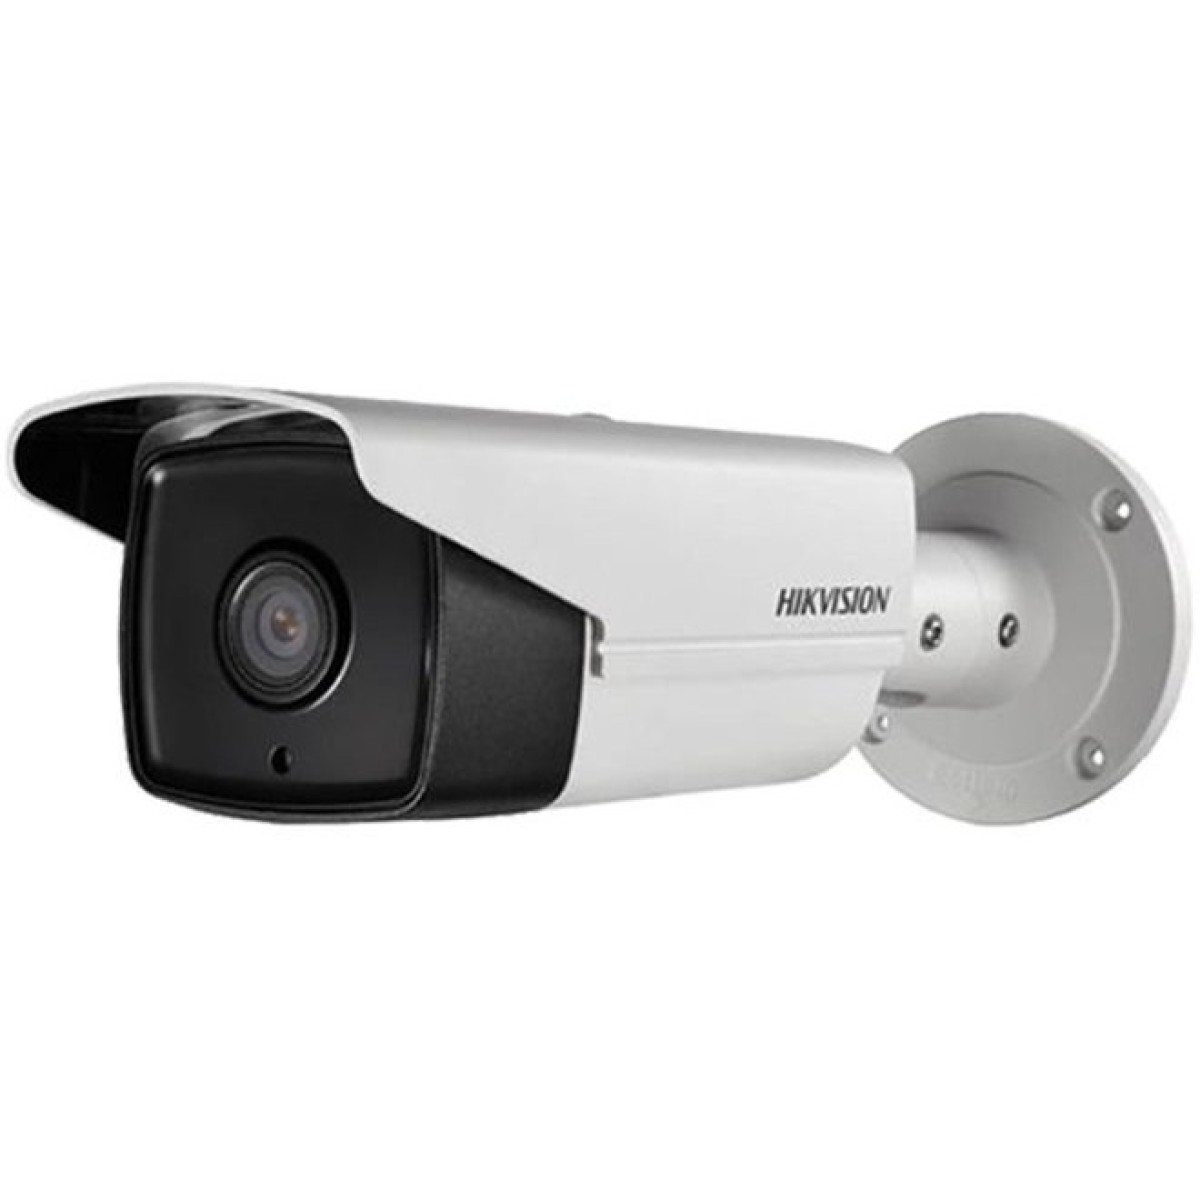 IP-камера Hikvision DS-2CD2T85FWD-I8 (4.0) 98_98.jpg